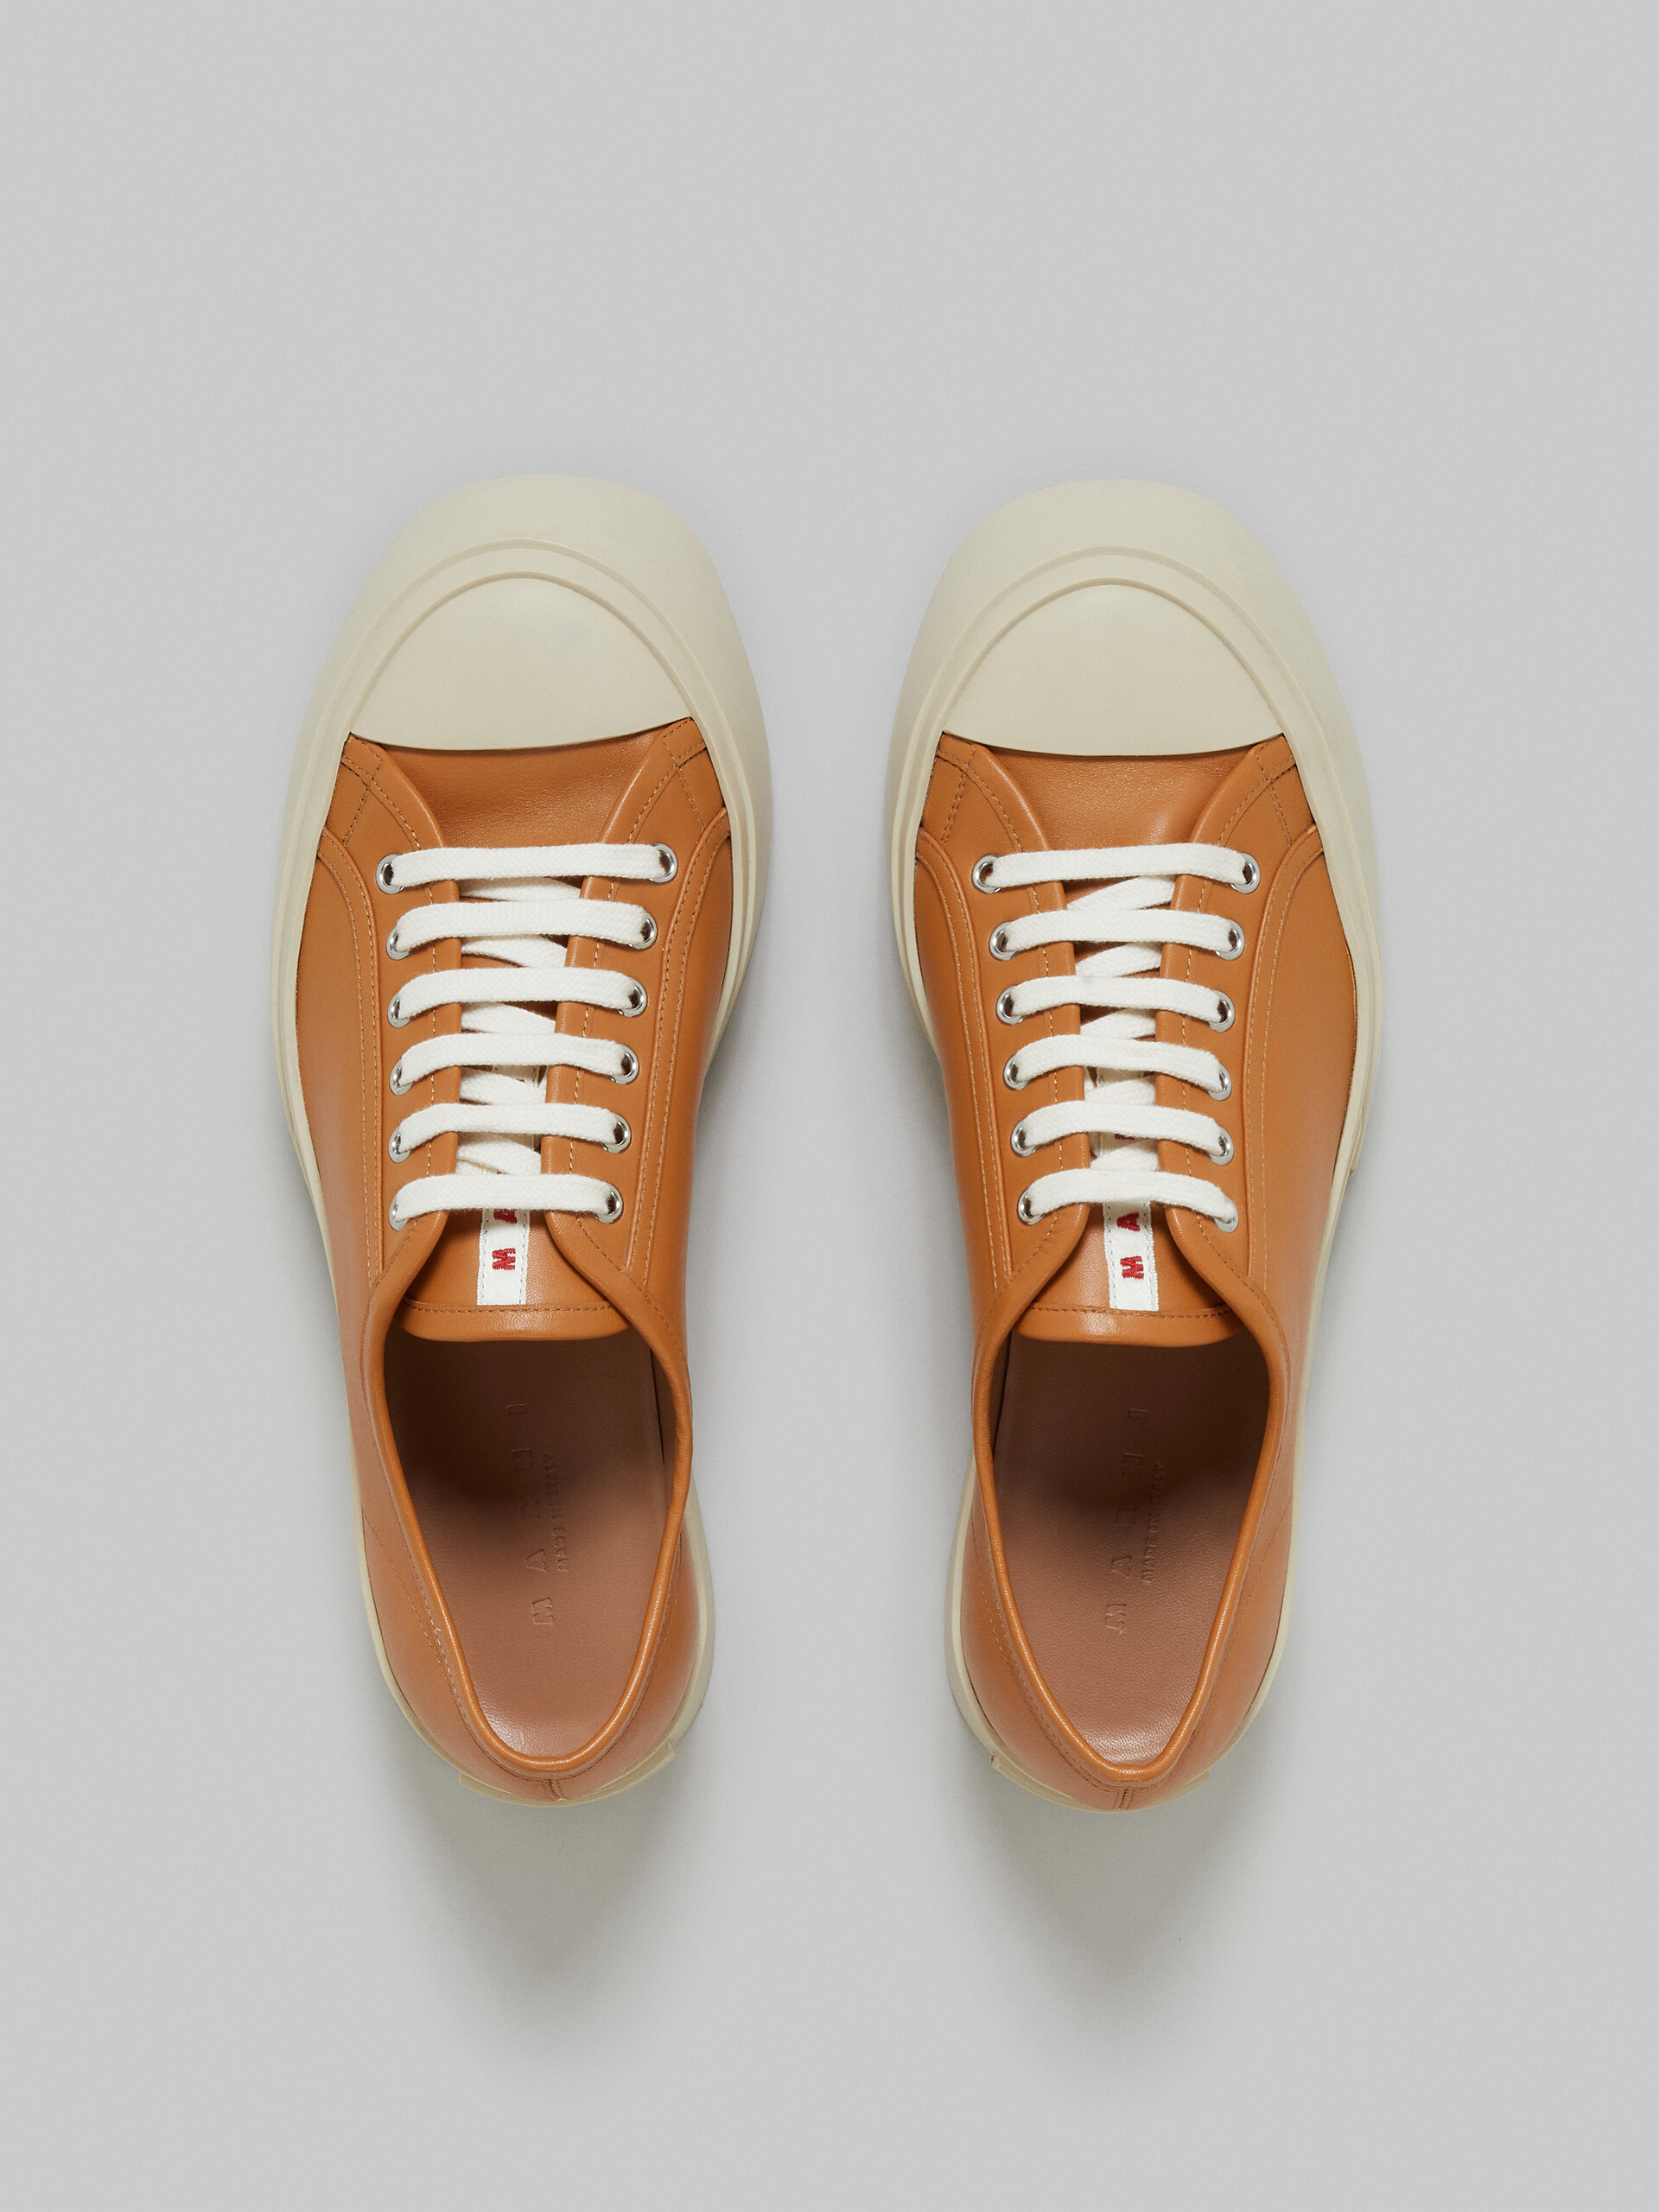 Brown nappa leather Pablo sneaker - Sneakers - Image 4